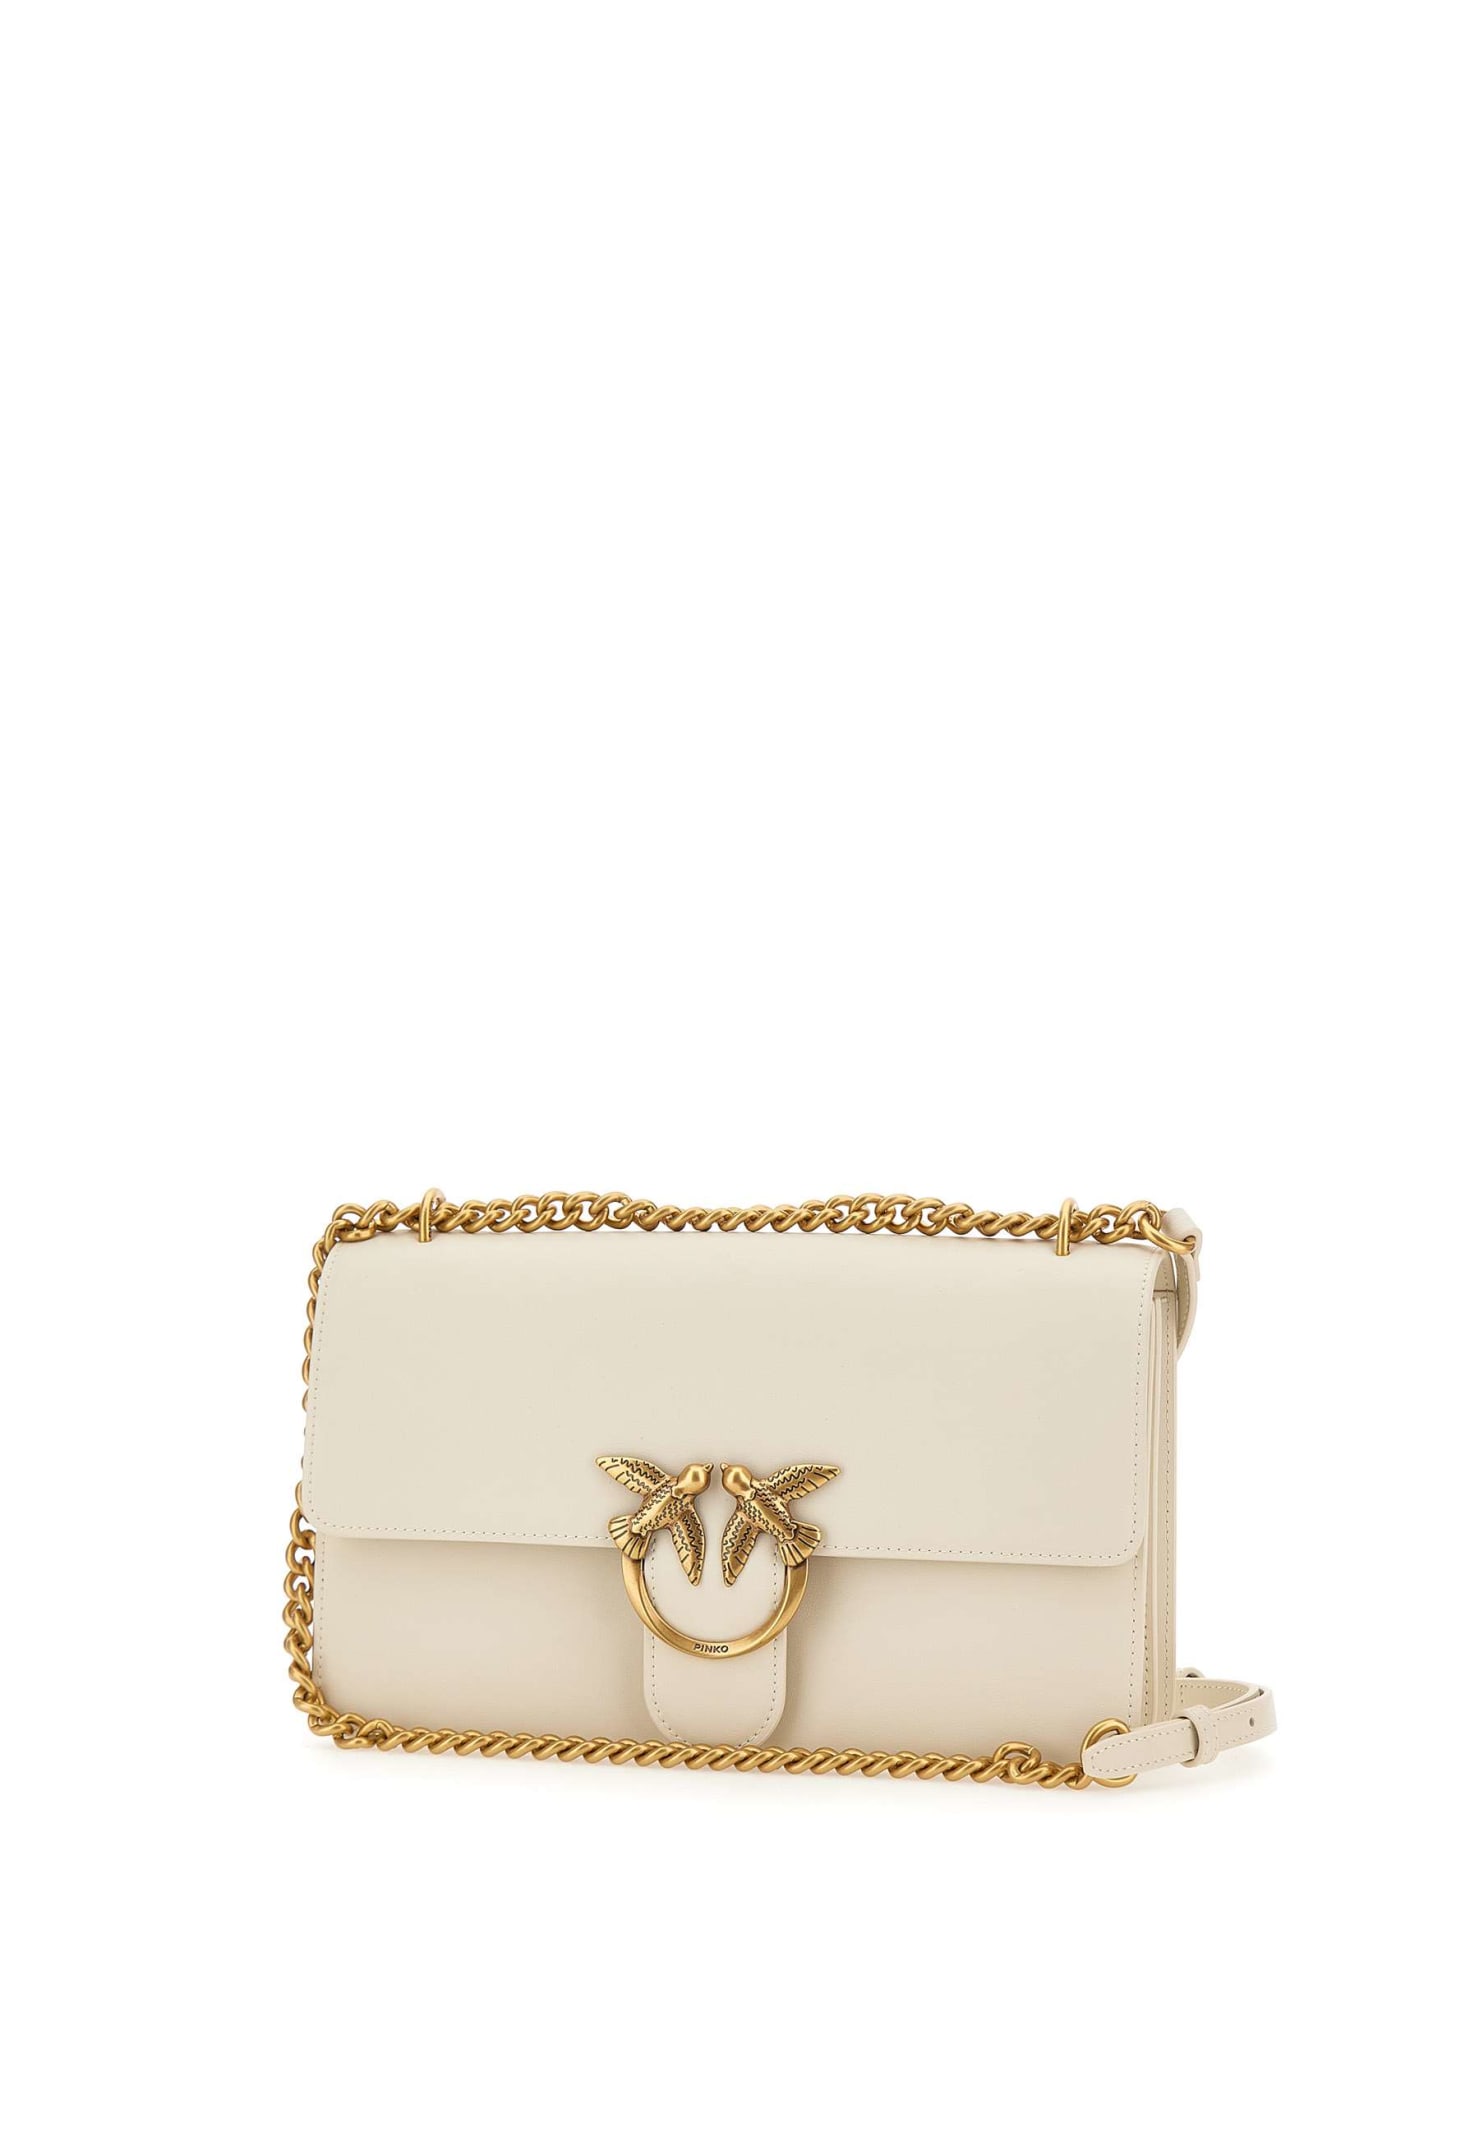 Pinko Love One Classic Leather Bag In White